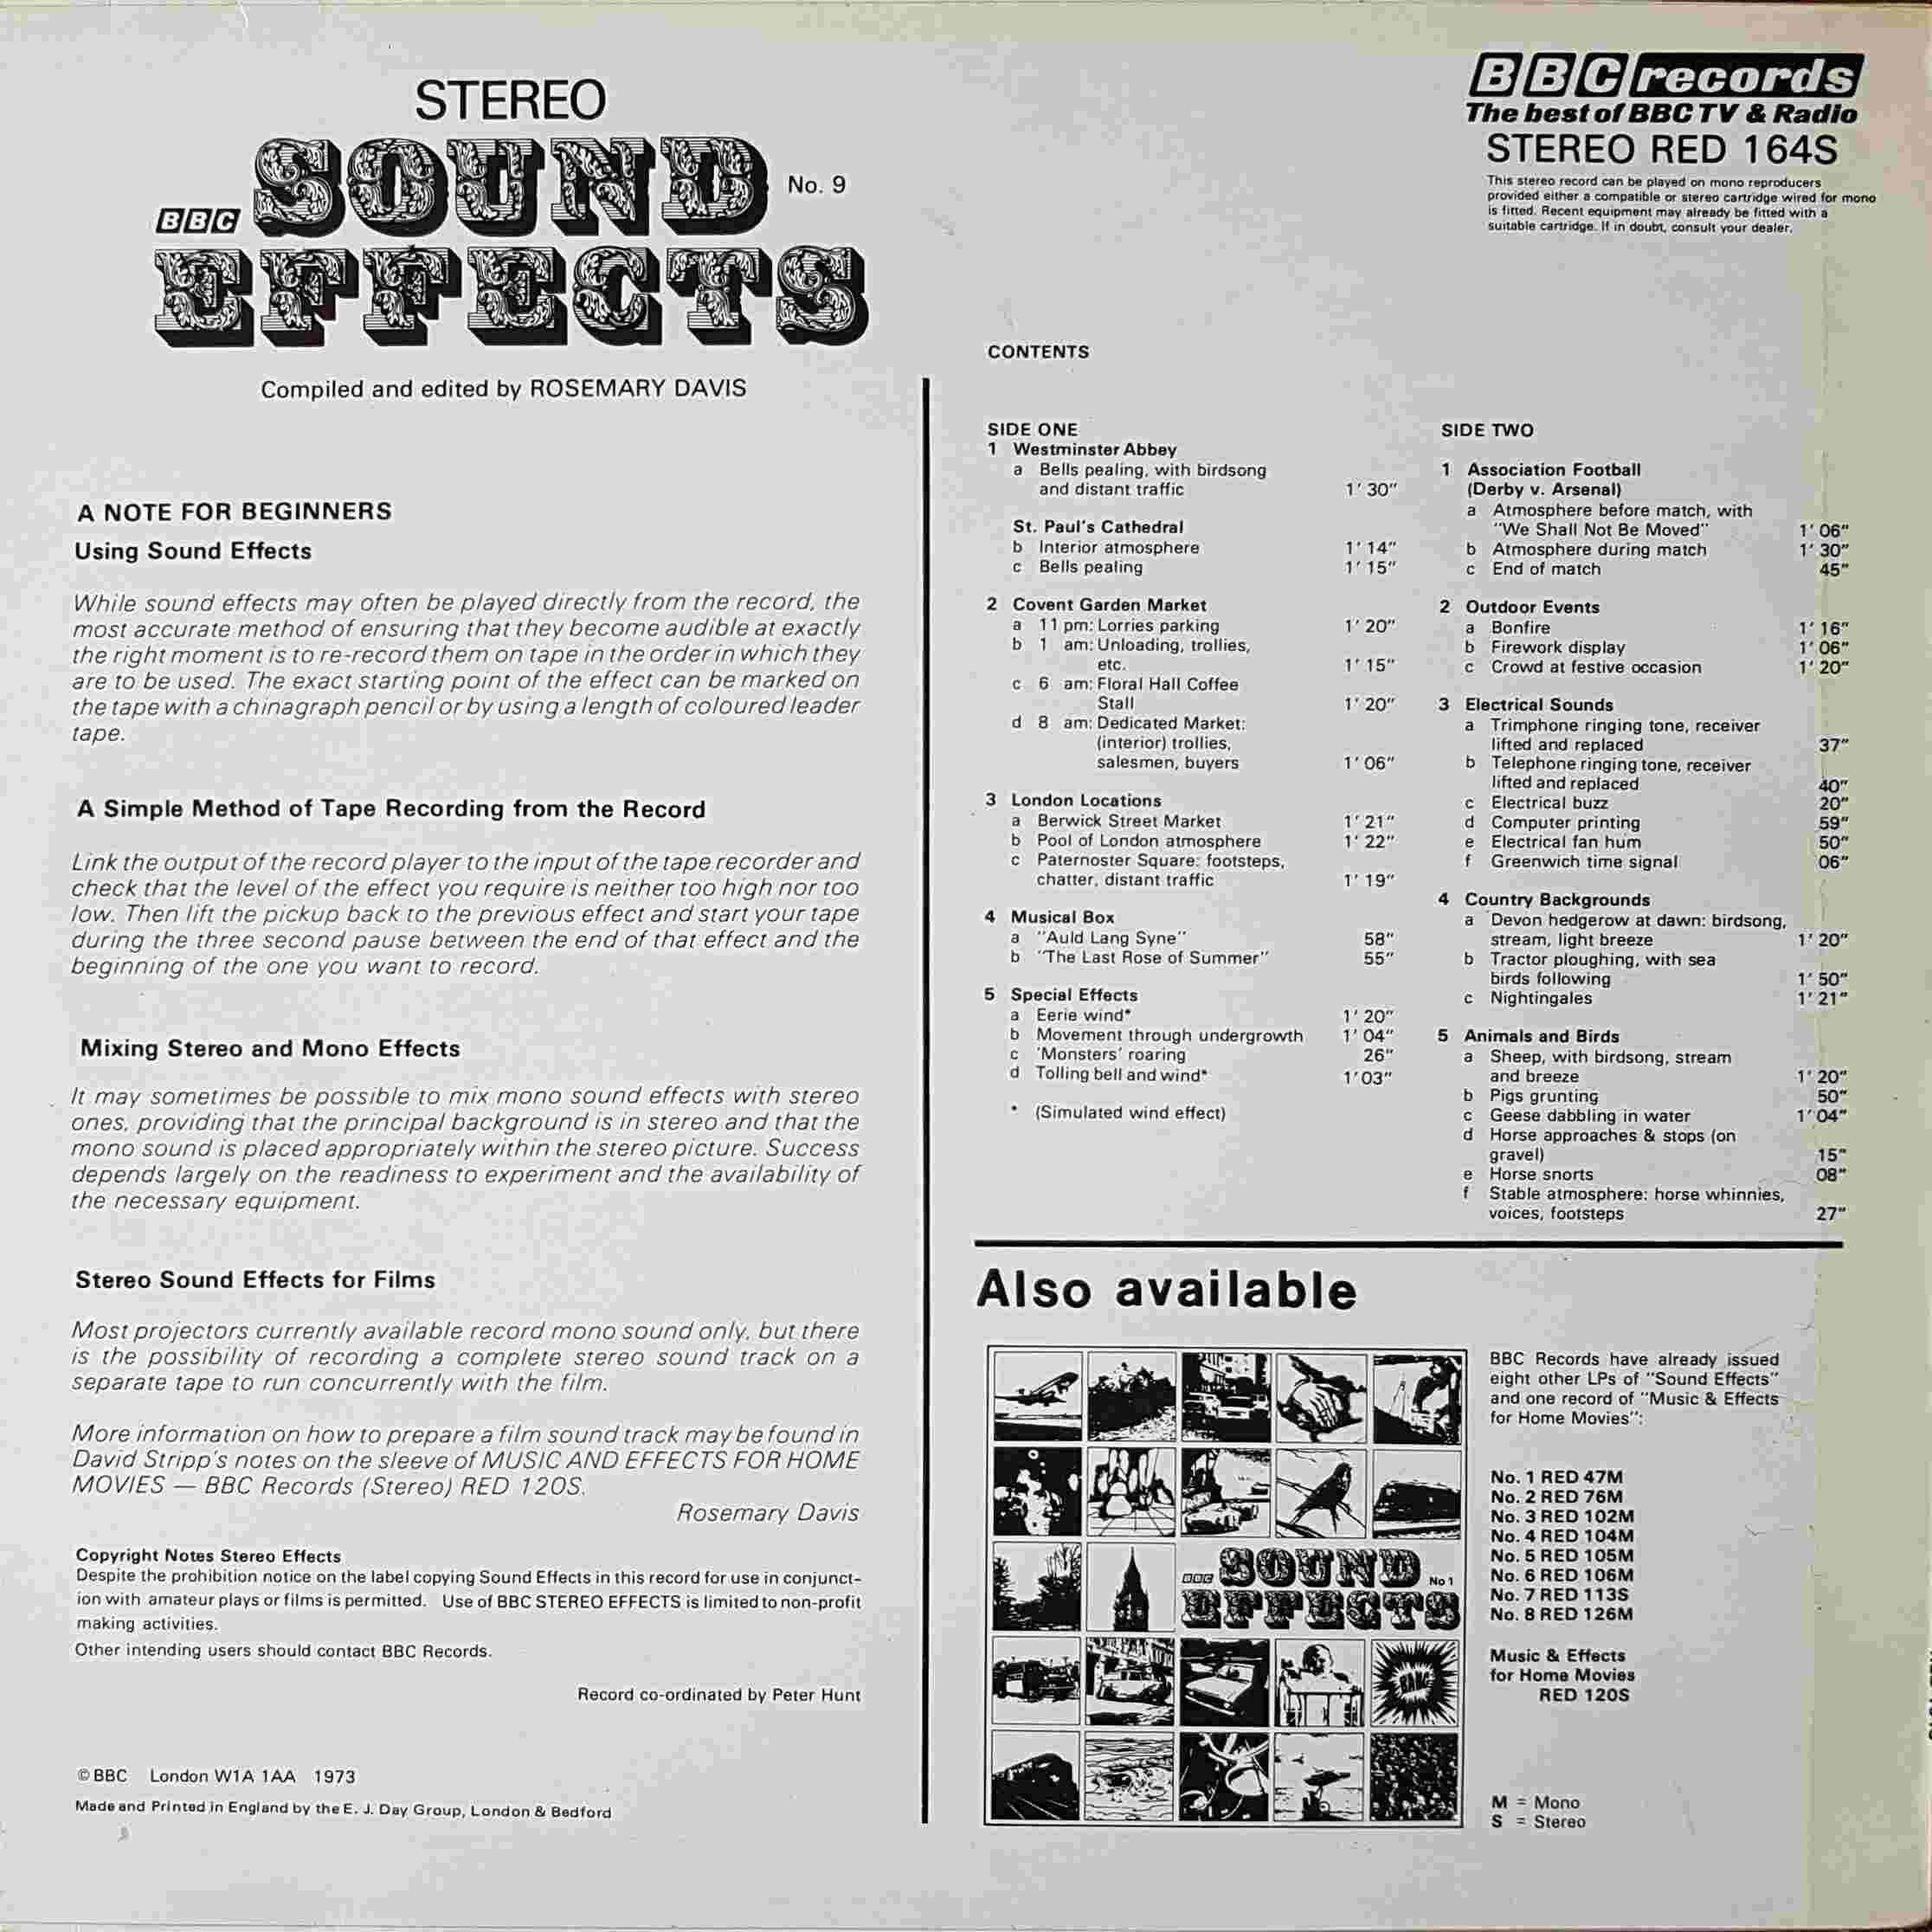 Picture of RED 164 Sound effects no. 9 by artist Various from the BBC records and Tapes library